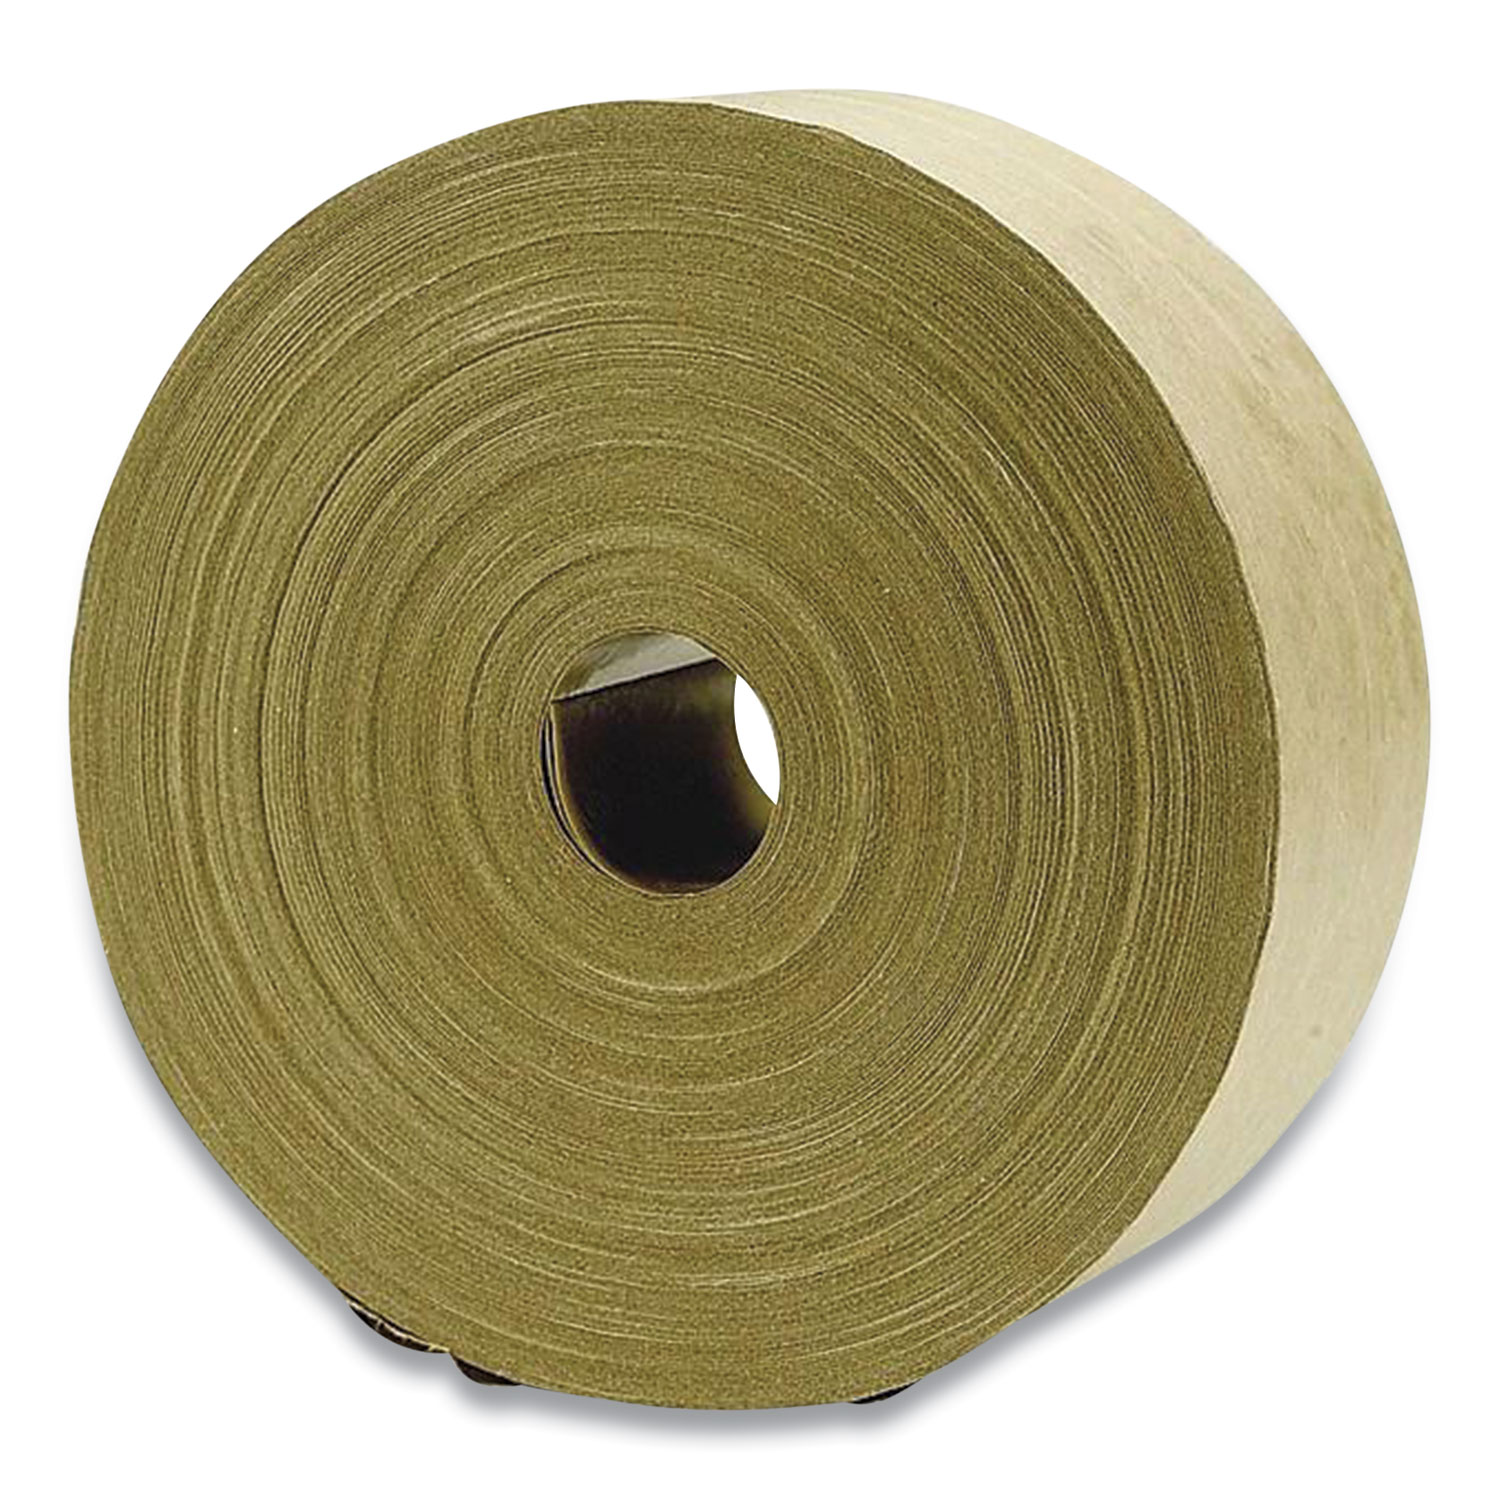 Duck® Reinforced Packing Tape, 1.5 Core, 2.75 x 166.6 yds, Brown